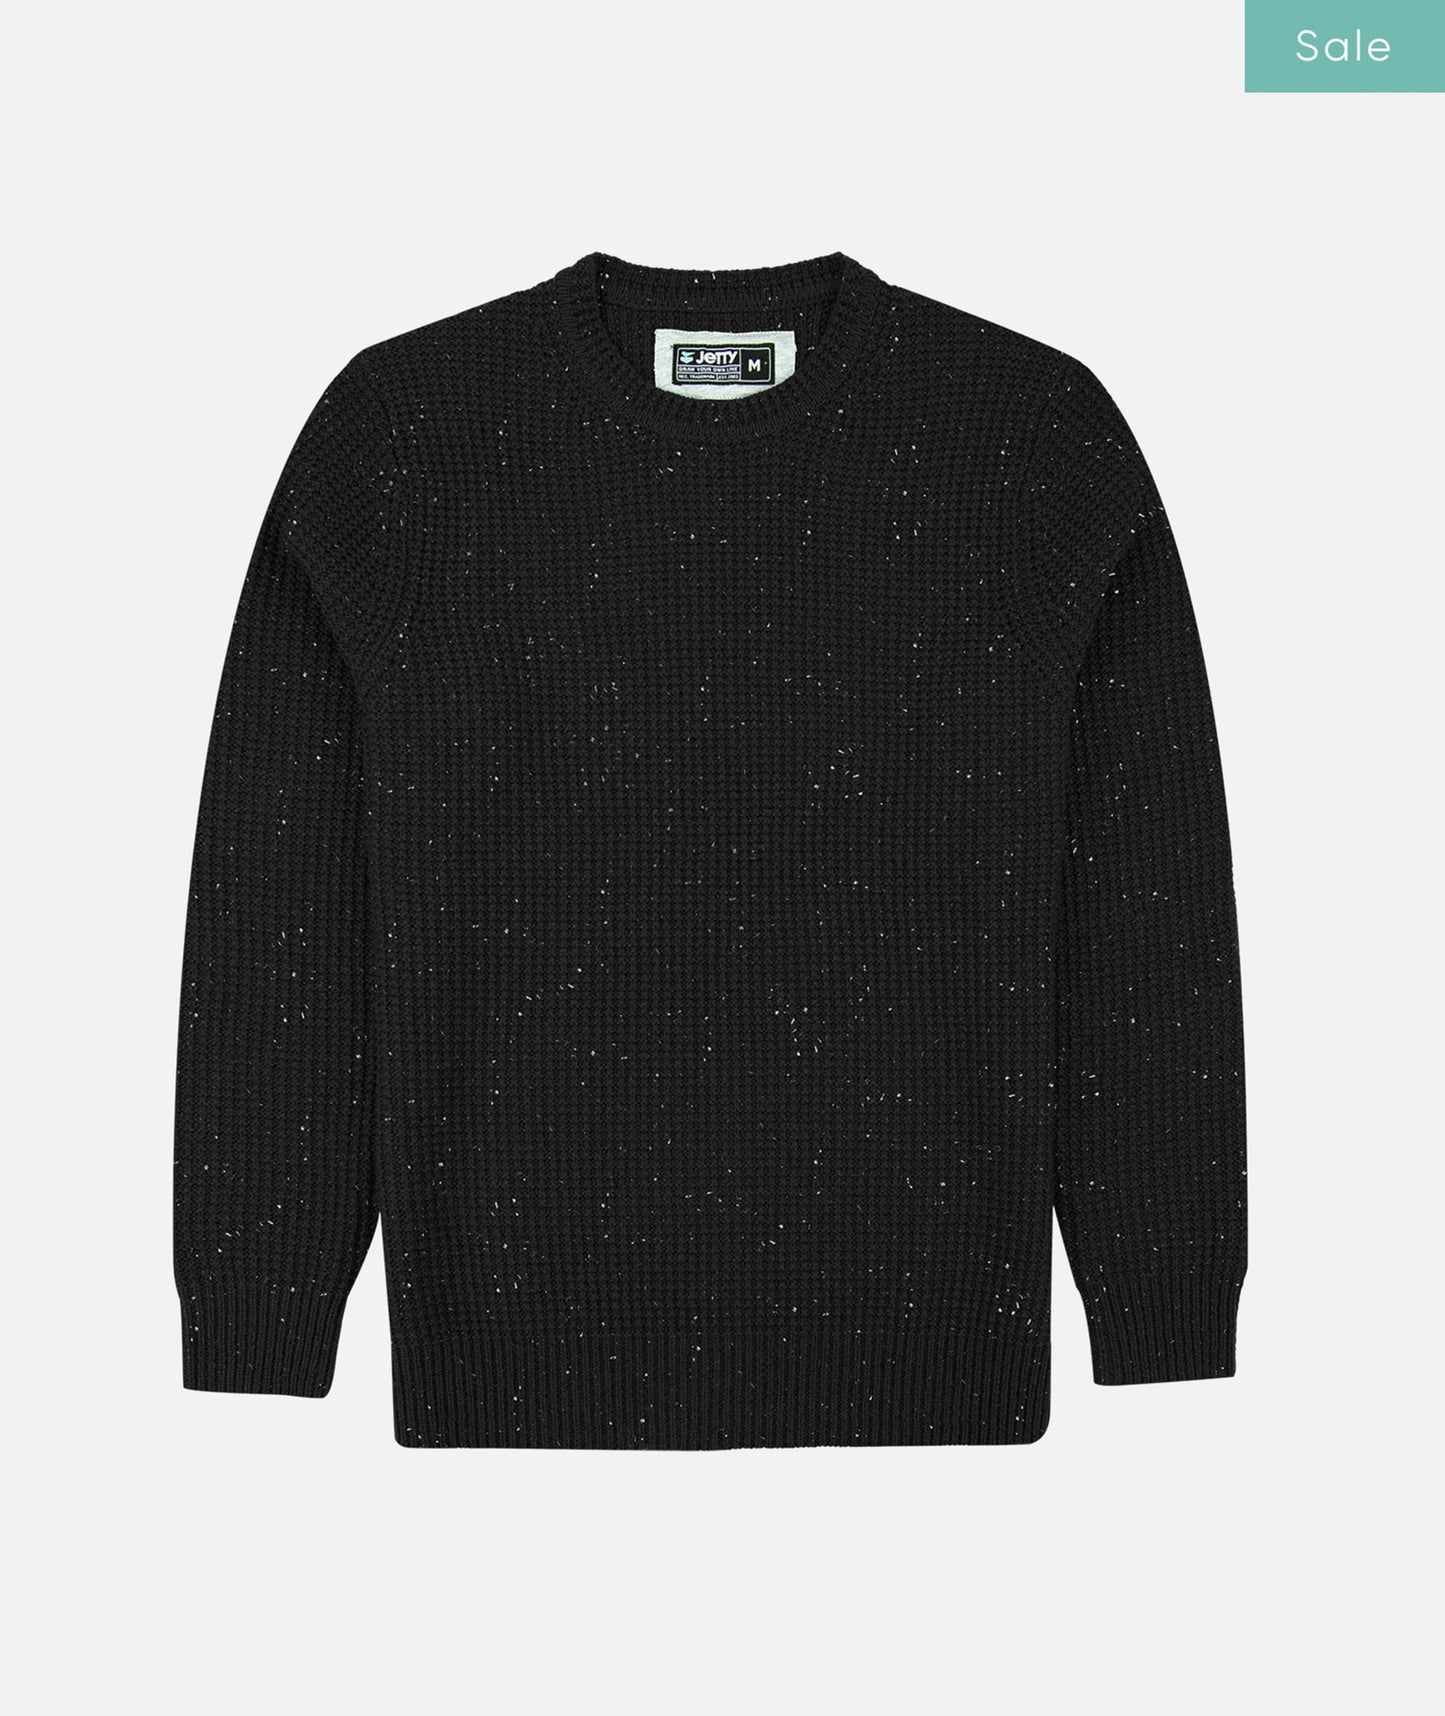 The Paragon Sweater - Black